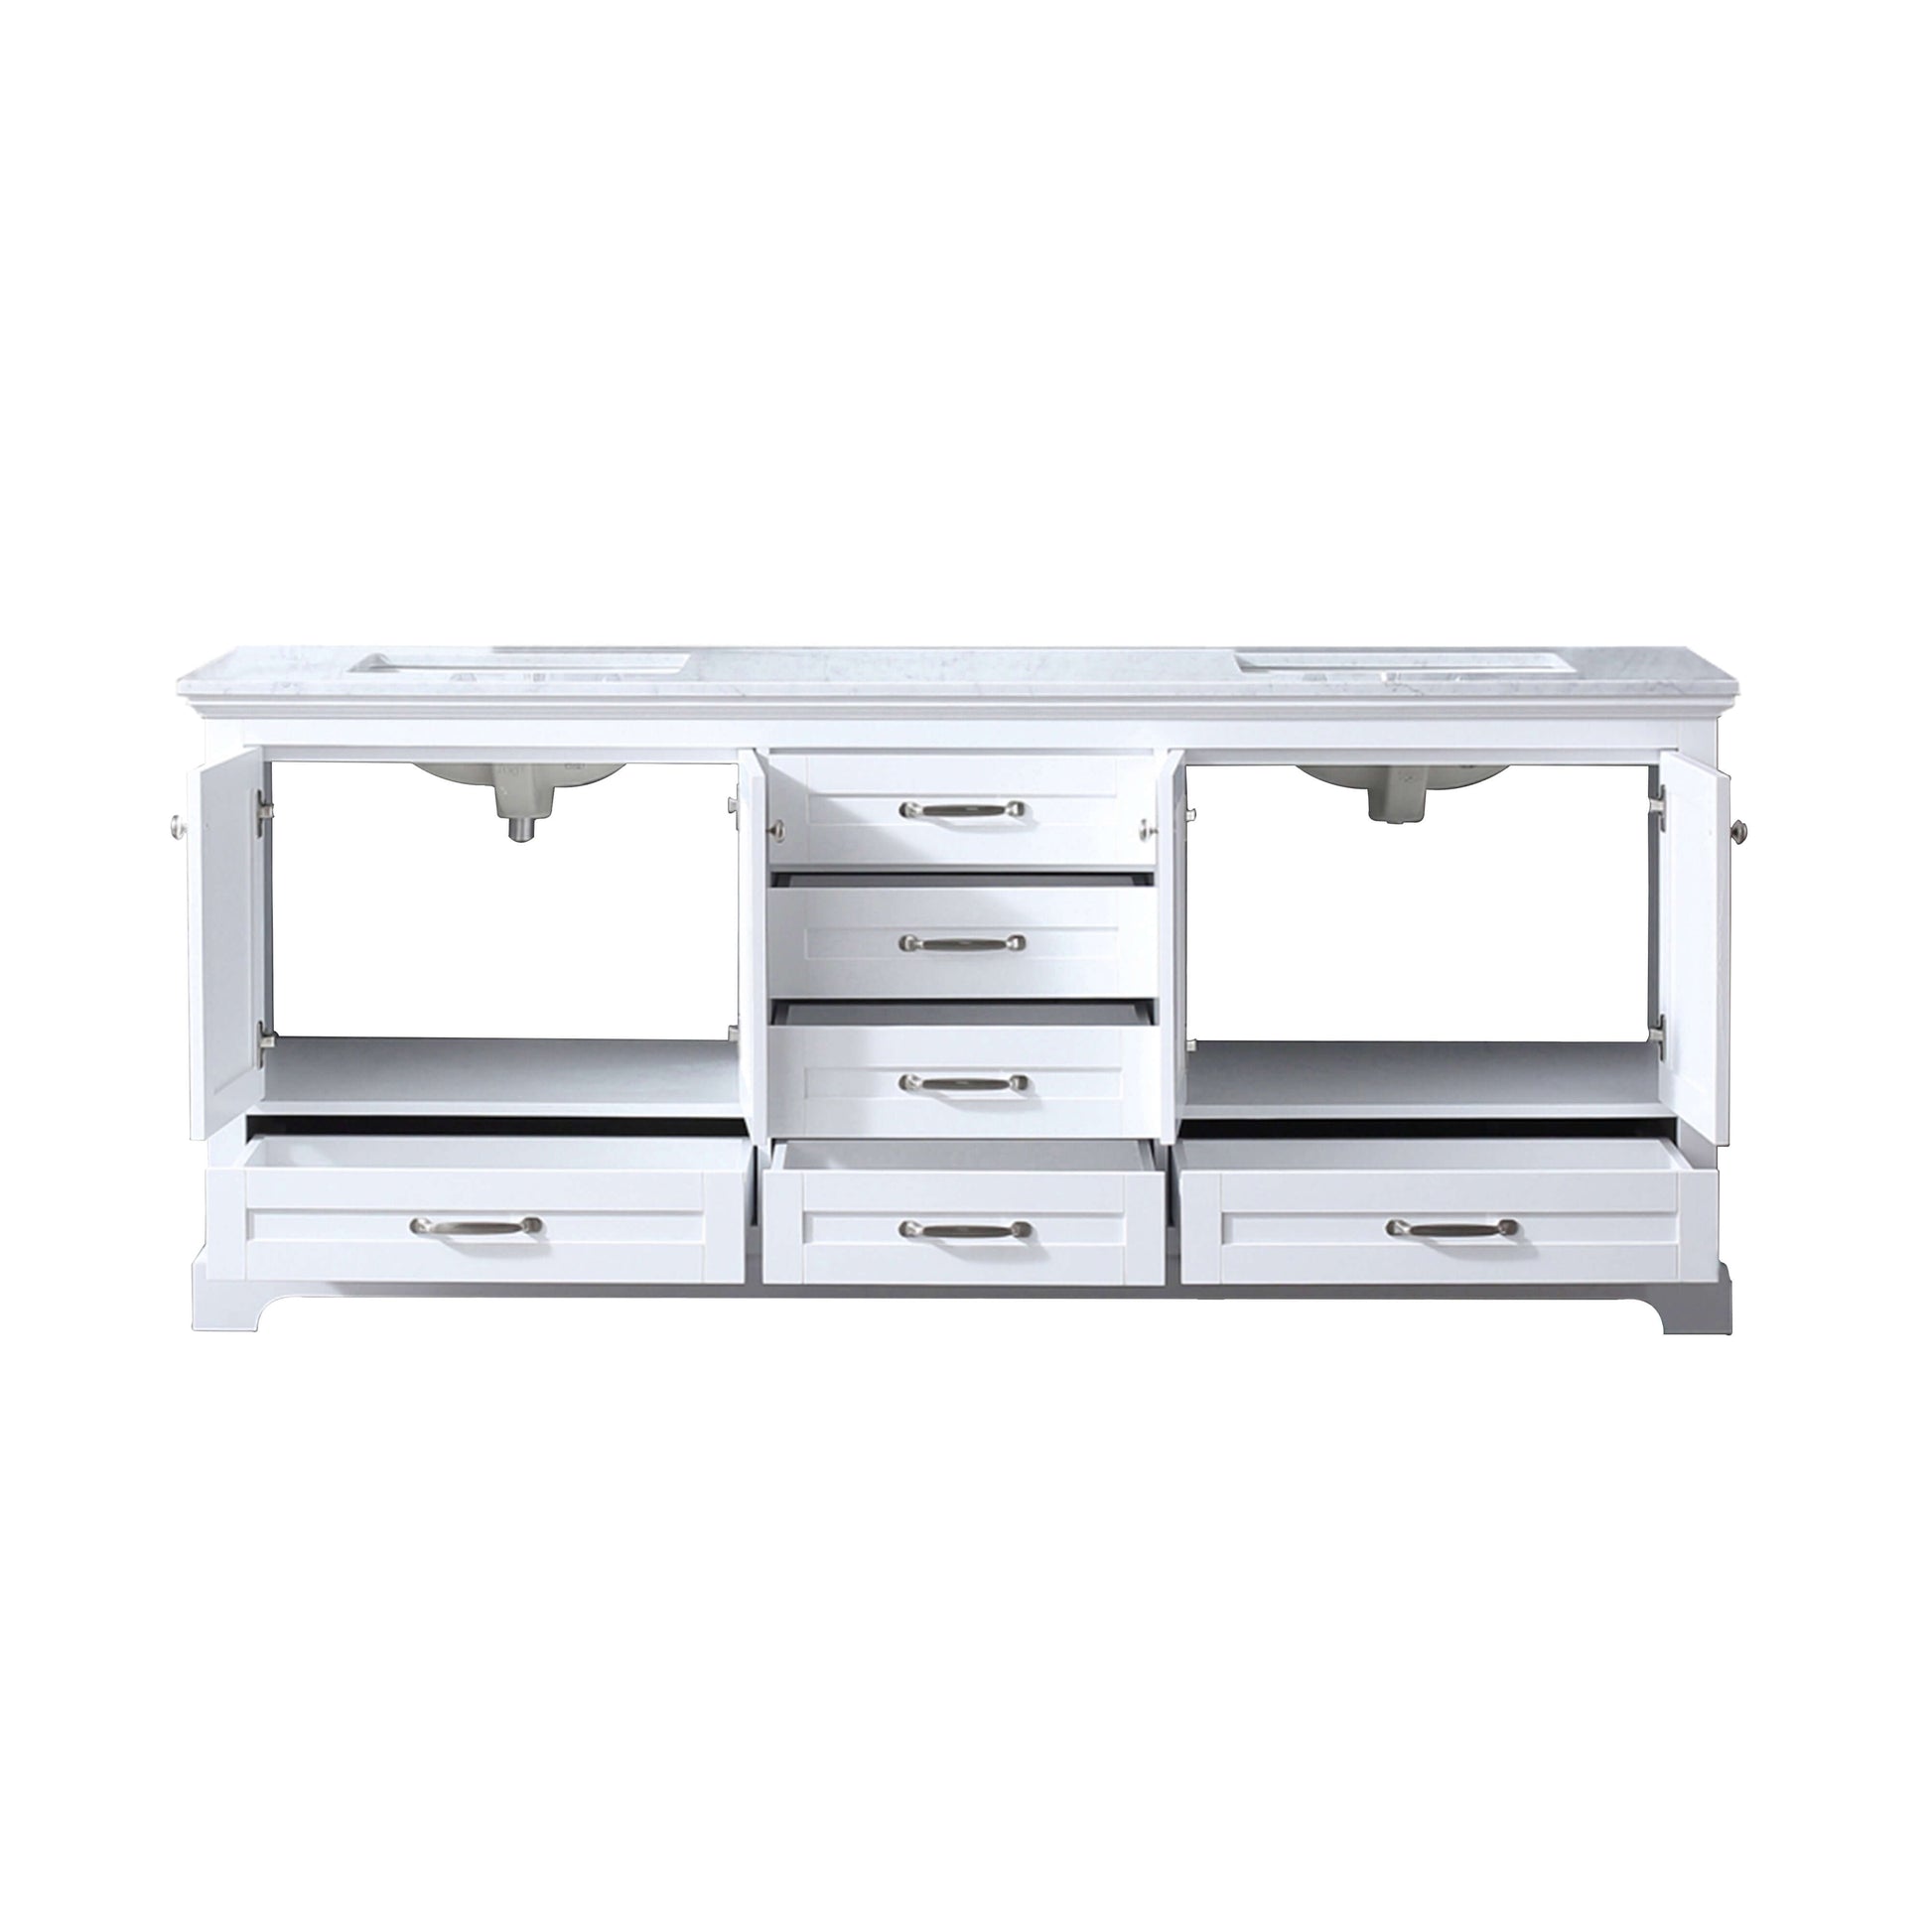 Dukes 80" White Double Vanity, White Carrara Marble Top, White Square Sinks and no Mirror - LD342280DADS000